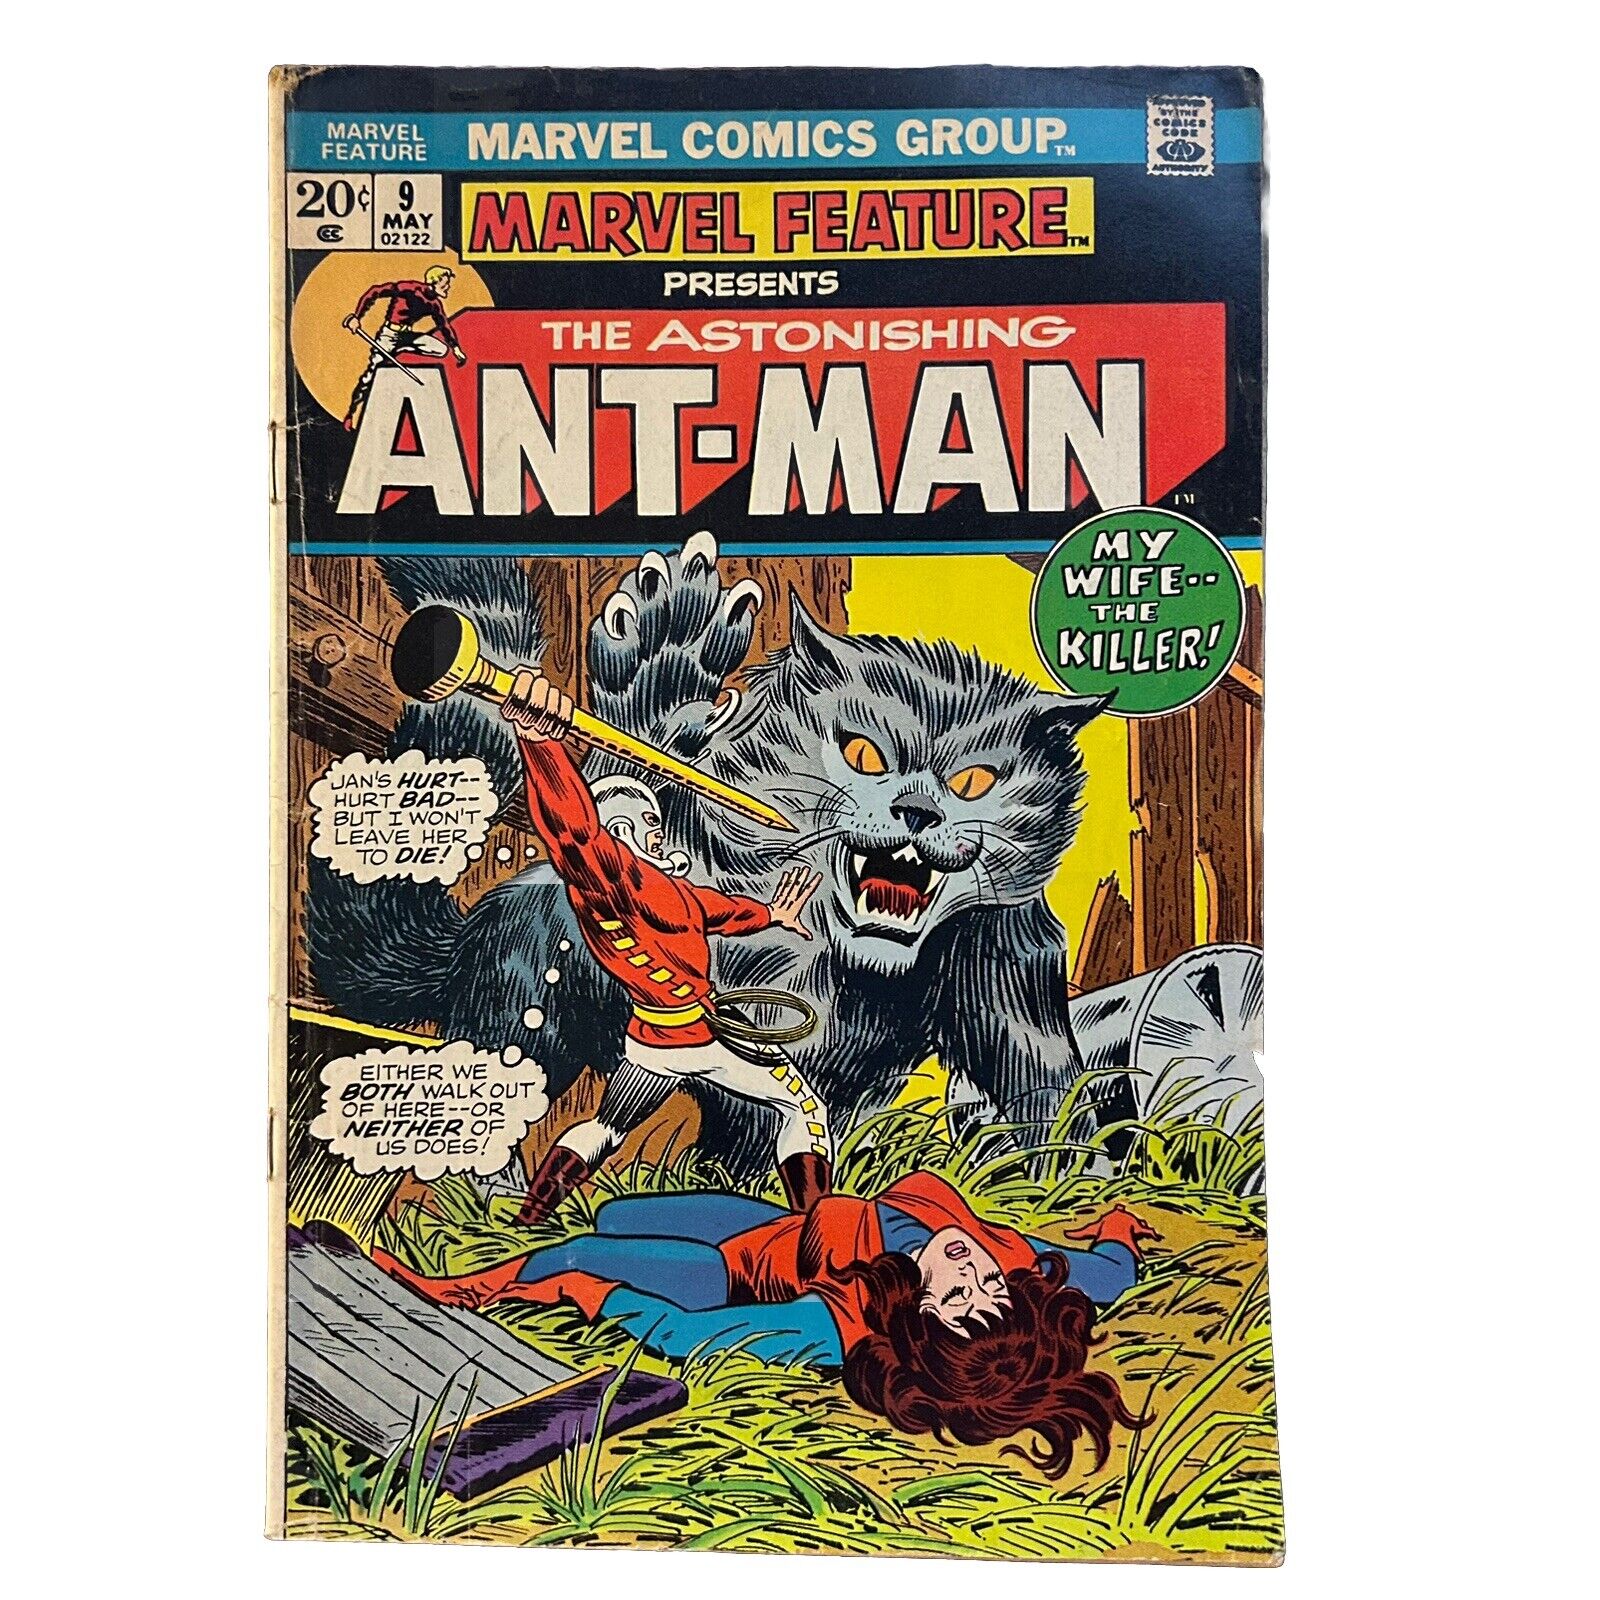 MARVEL FEATURE No. 9 May 1973 Ant-Man - Marvel GD